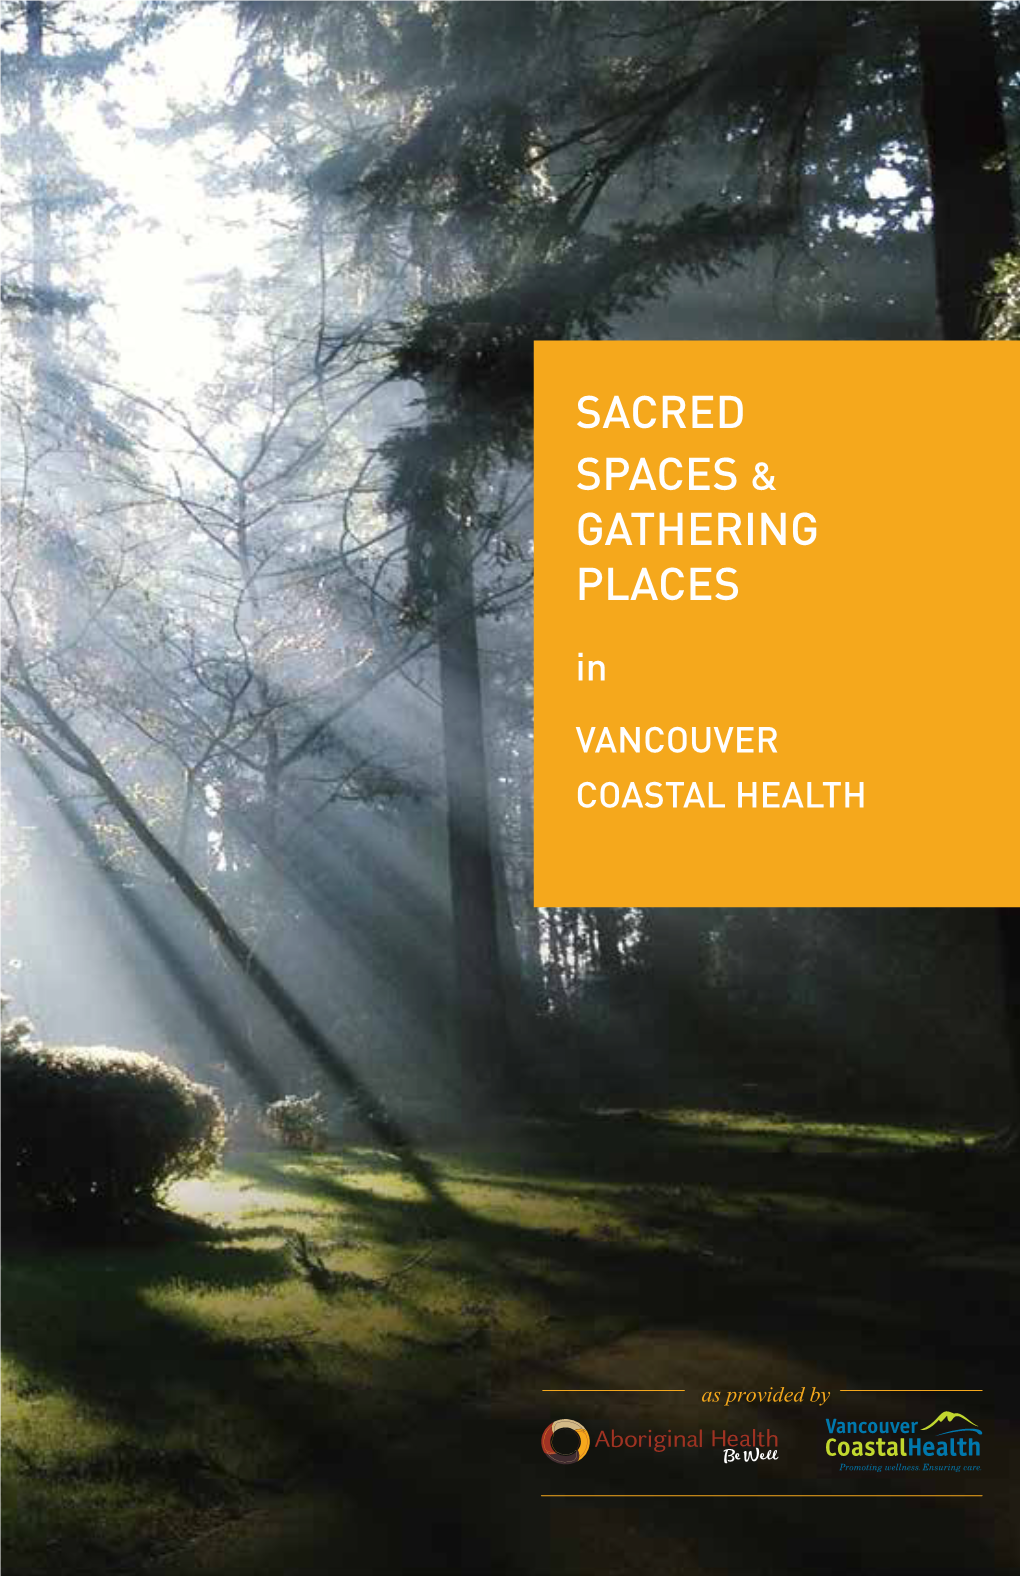 Sacred Spaces & Gathering Places